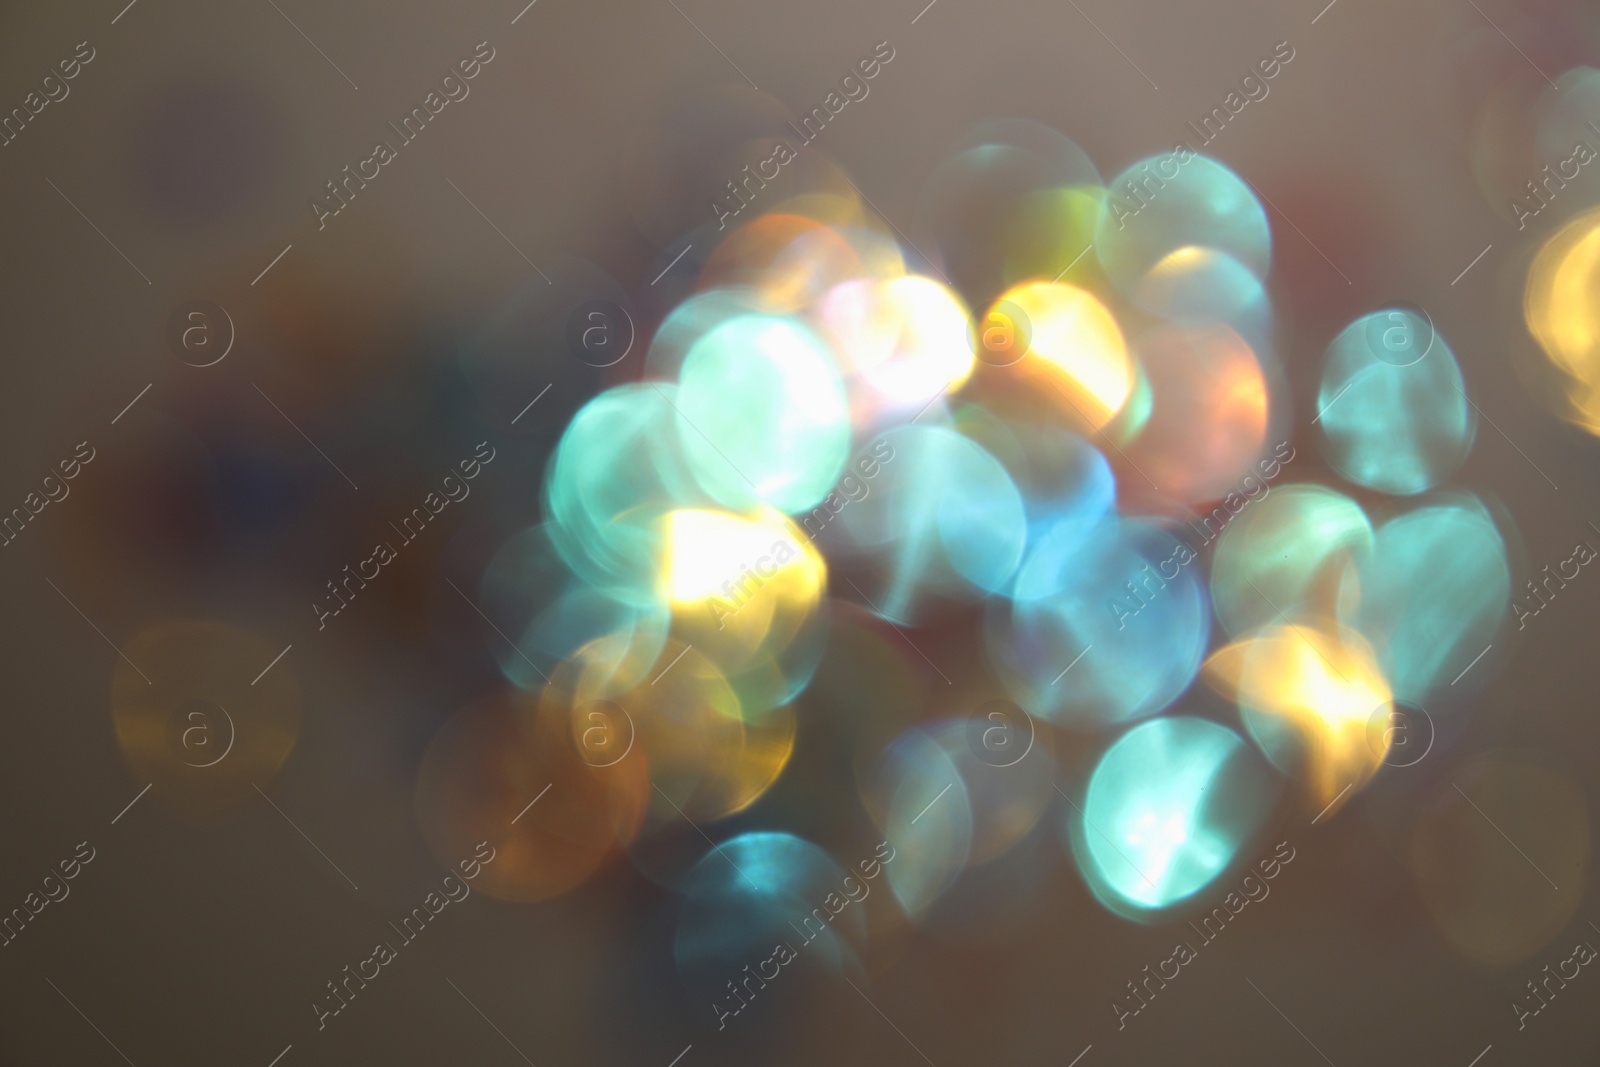 Photo of Blurred view of shiny lights on light background. Bokeh effect